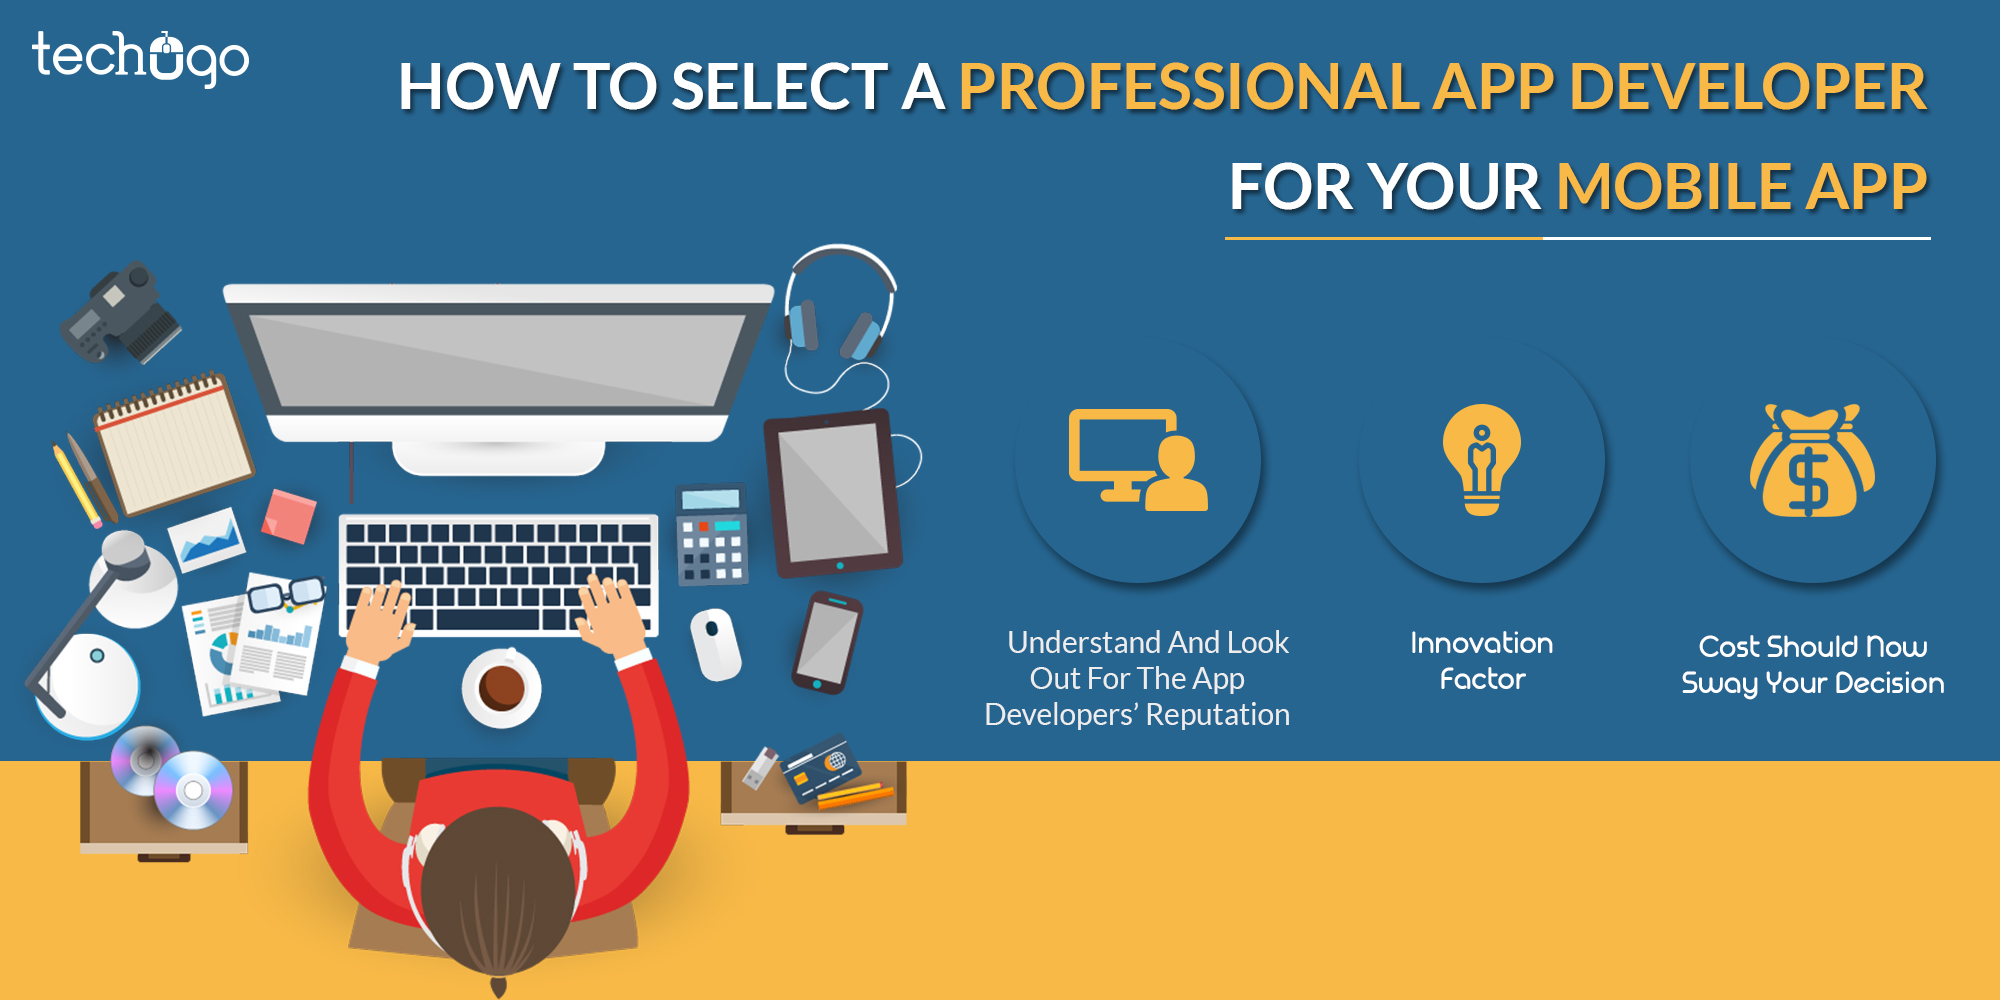 How To Select A Professional App Developer For Your Mobile App